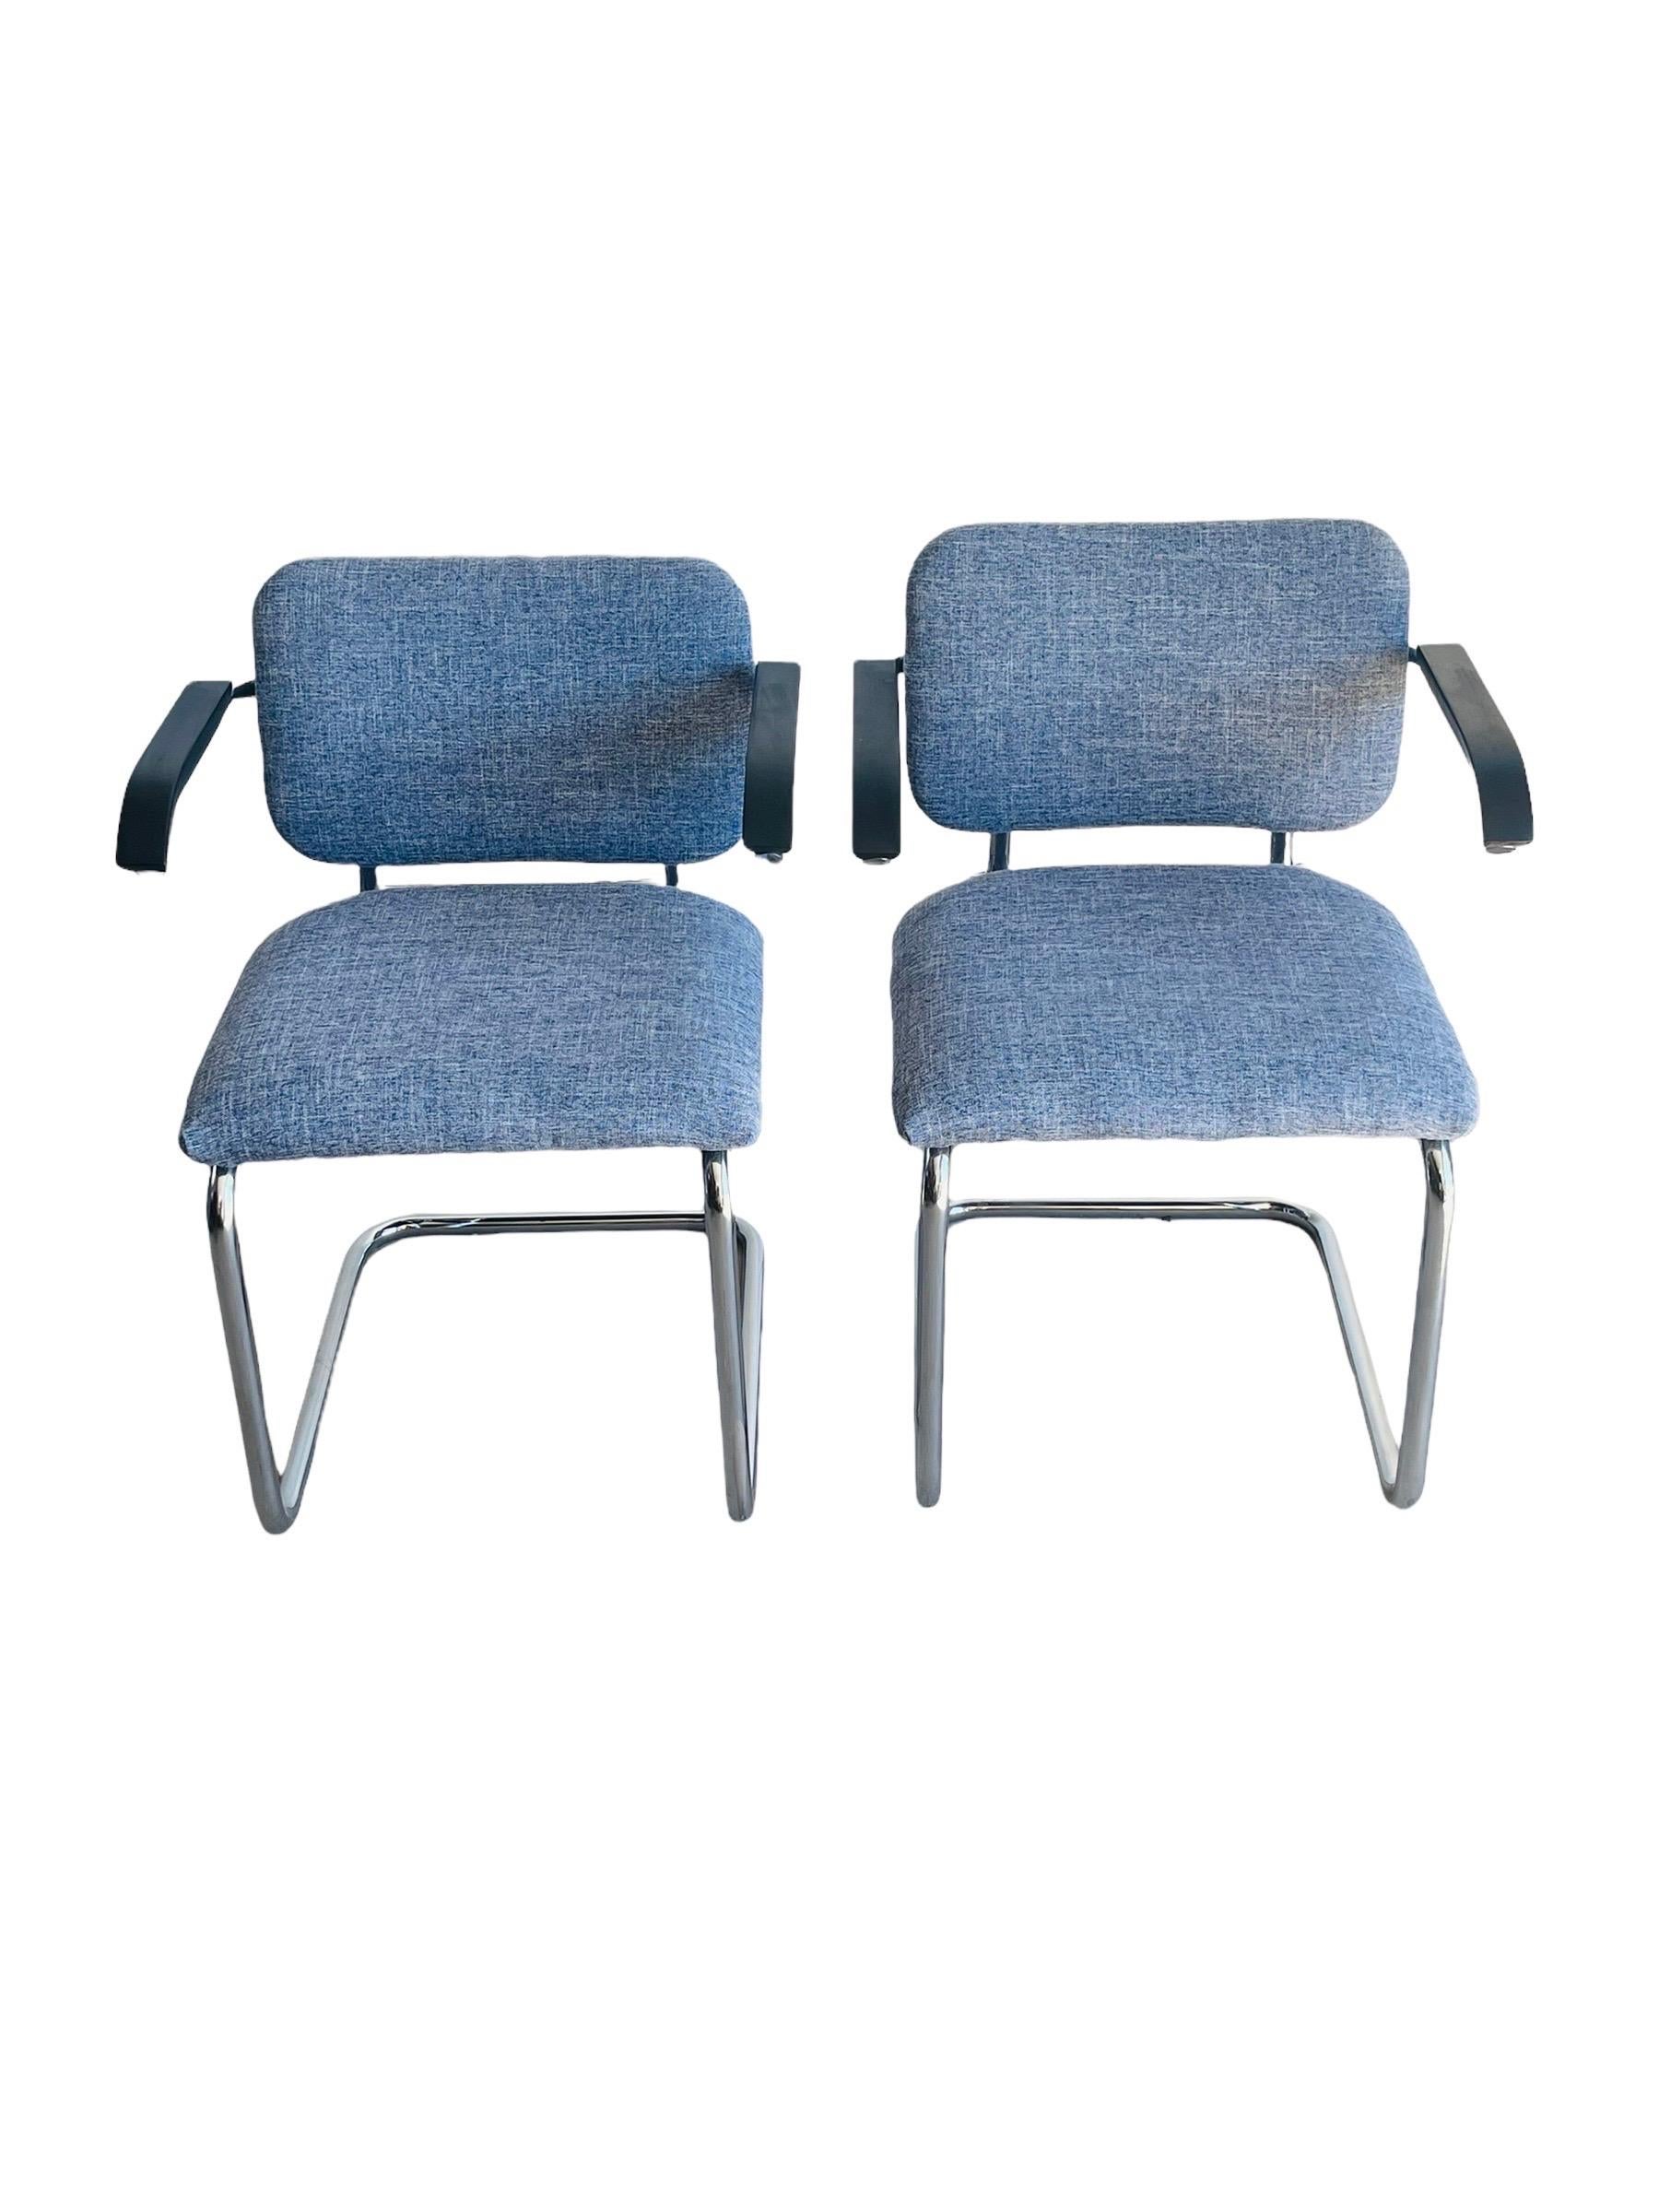 Set 6 Mid-Century Modern Marcel Breuer “Cesca” dining chairs. The Marcel Breuer “Cesca” chairs is said to be the most reproduced chair design in history. This popularity is a testament to the timelessness of Breuer’s groundbreaking design. Breuer